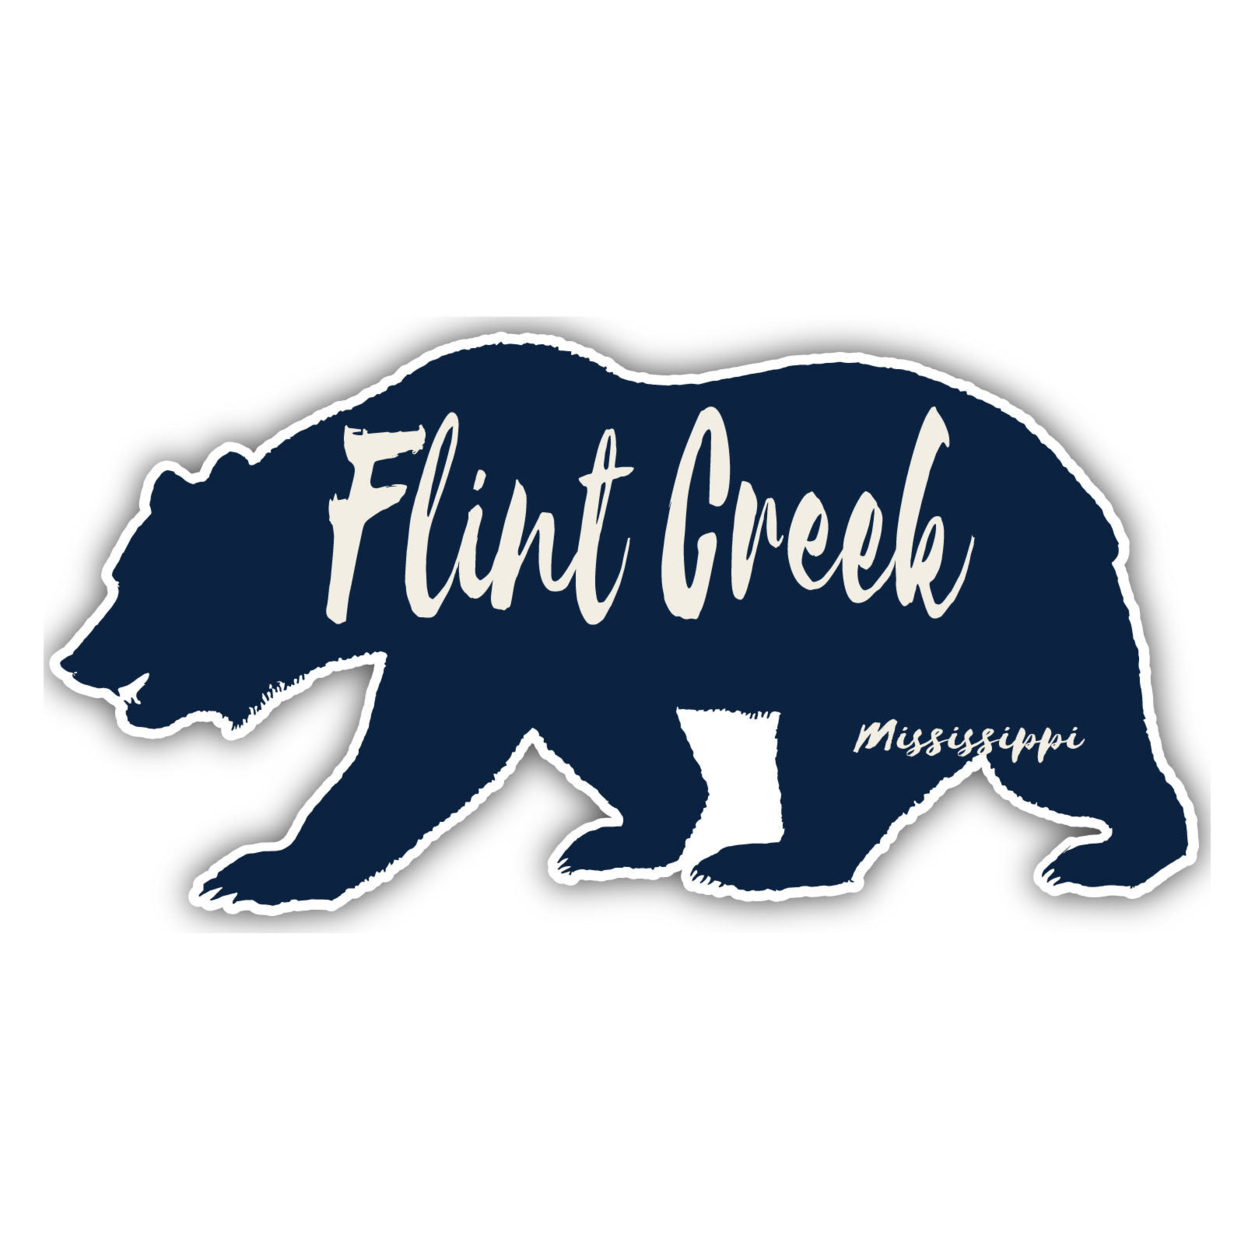 Flint Creek Mississippi Souvenir Decorative Stickers (Choose Theme And Size) - 4-Pack, 4-Inch, Bear